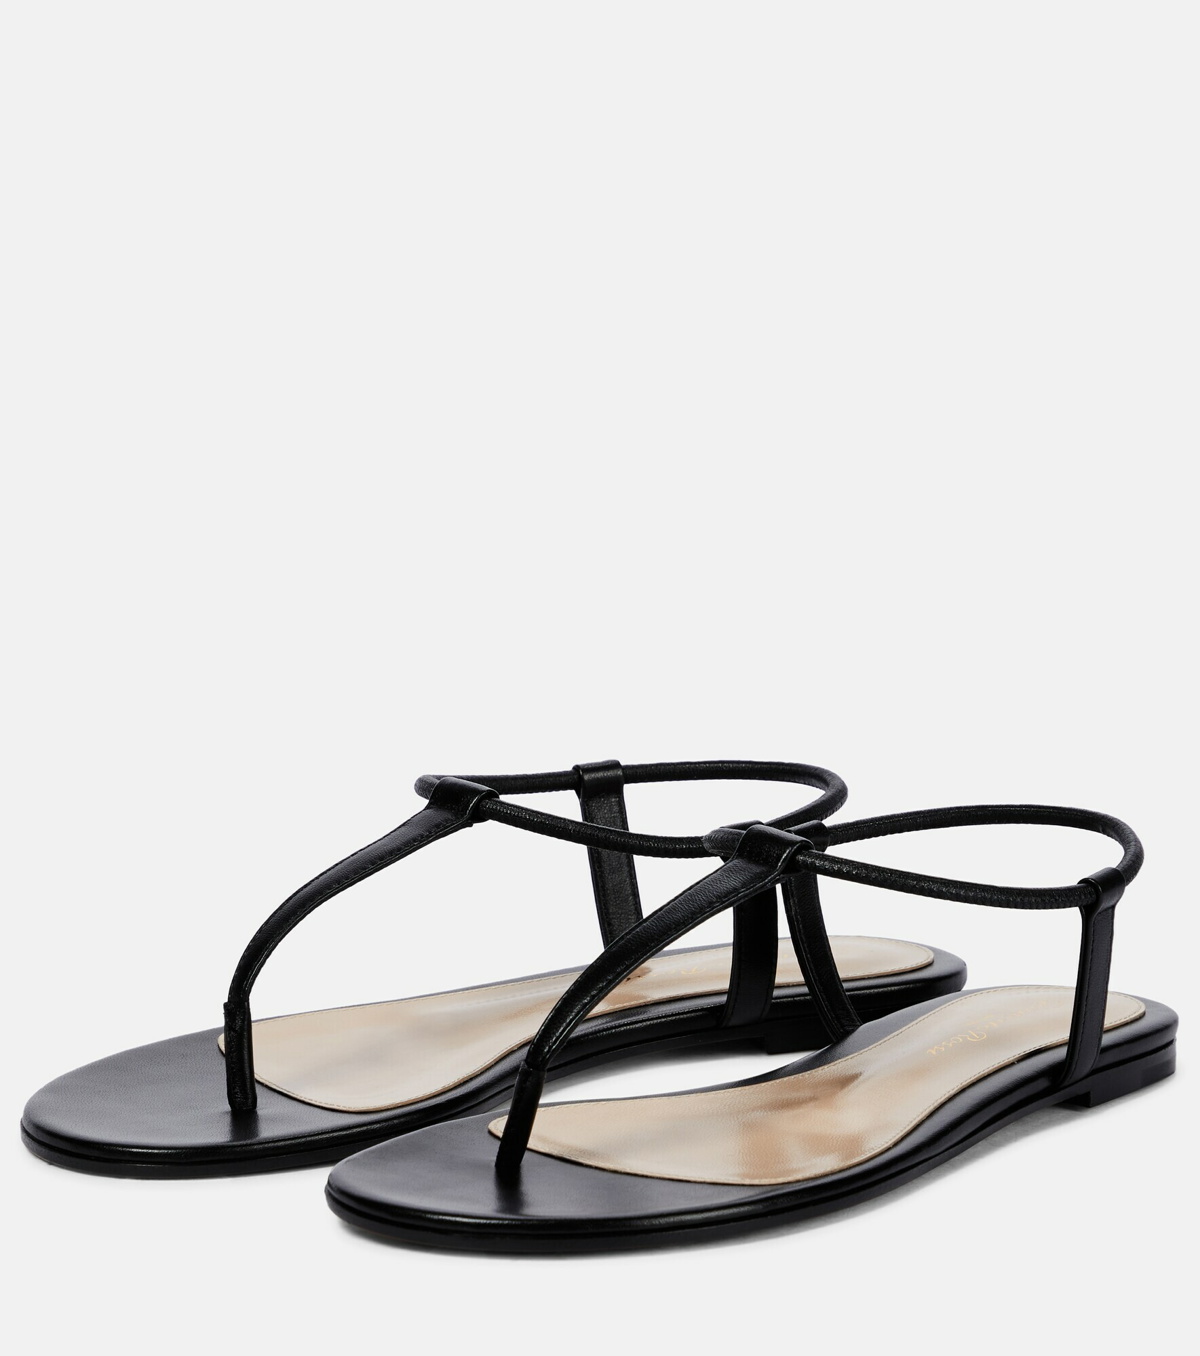 Gianvito Rossi - Jaey leather thong sandals Gianvito Rossi